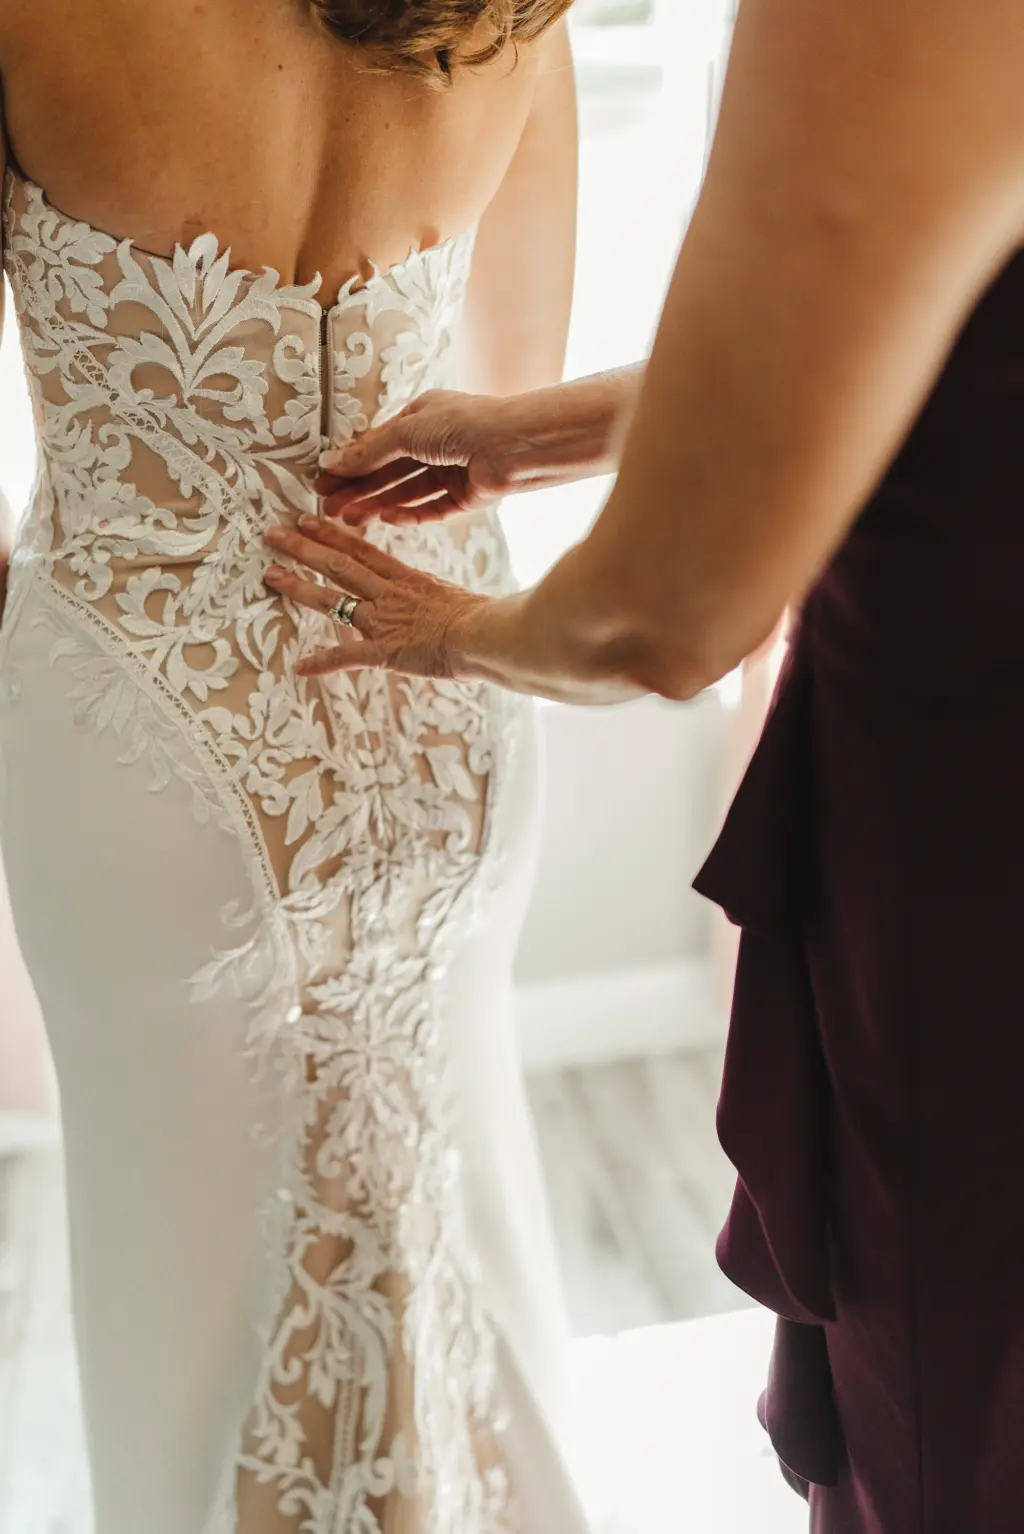 Bride Getting Ready | White and Nude Strapless Fit and Flare Wedding Dress with Lace Detail Inspiration